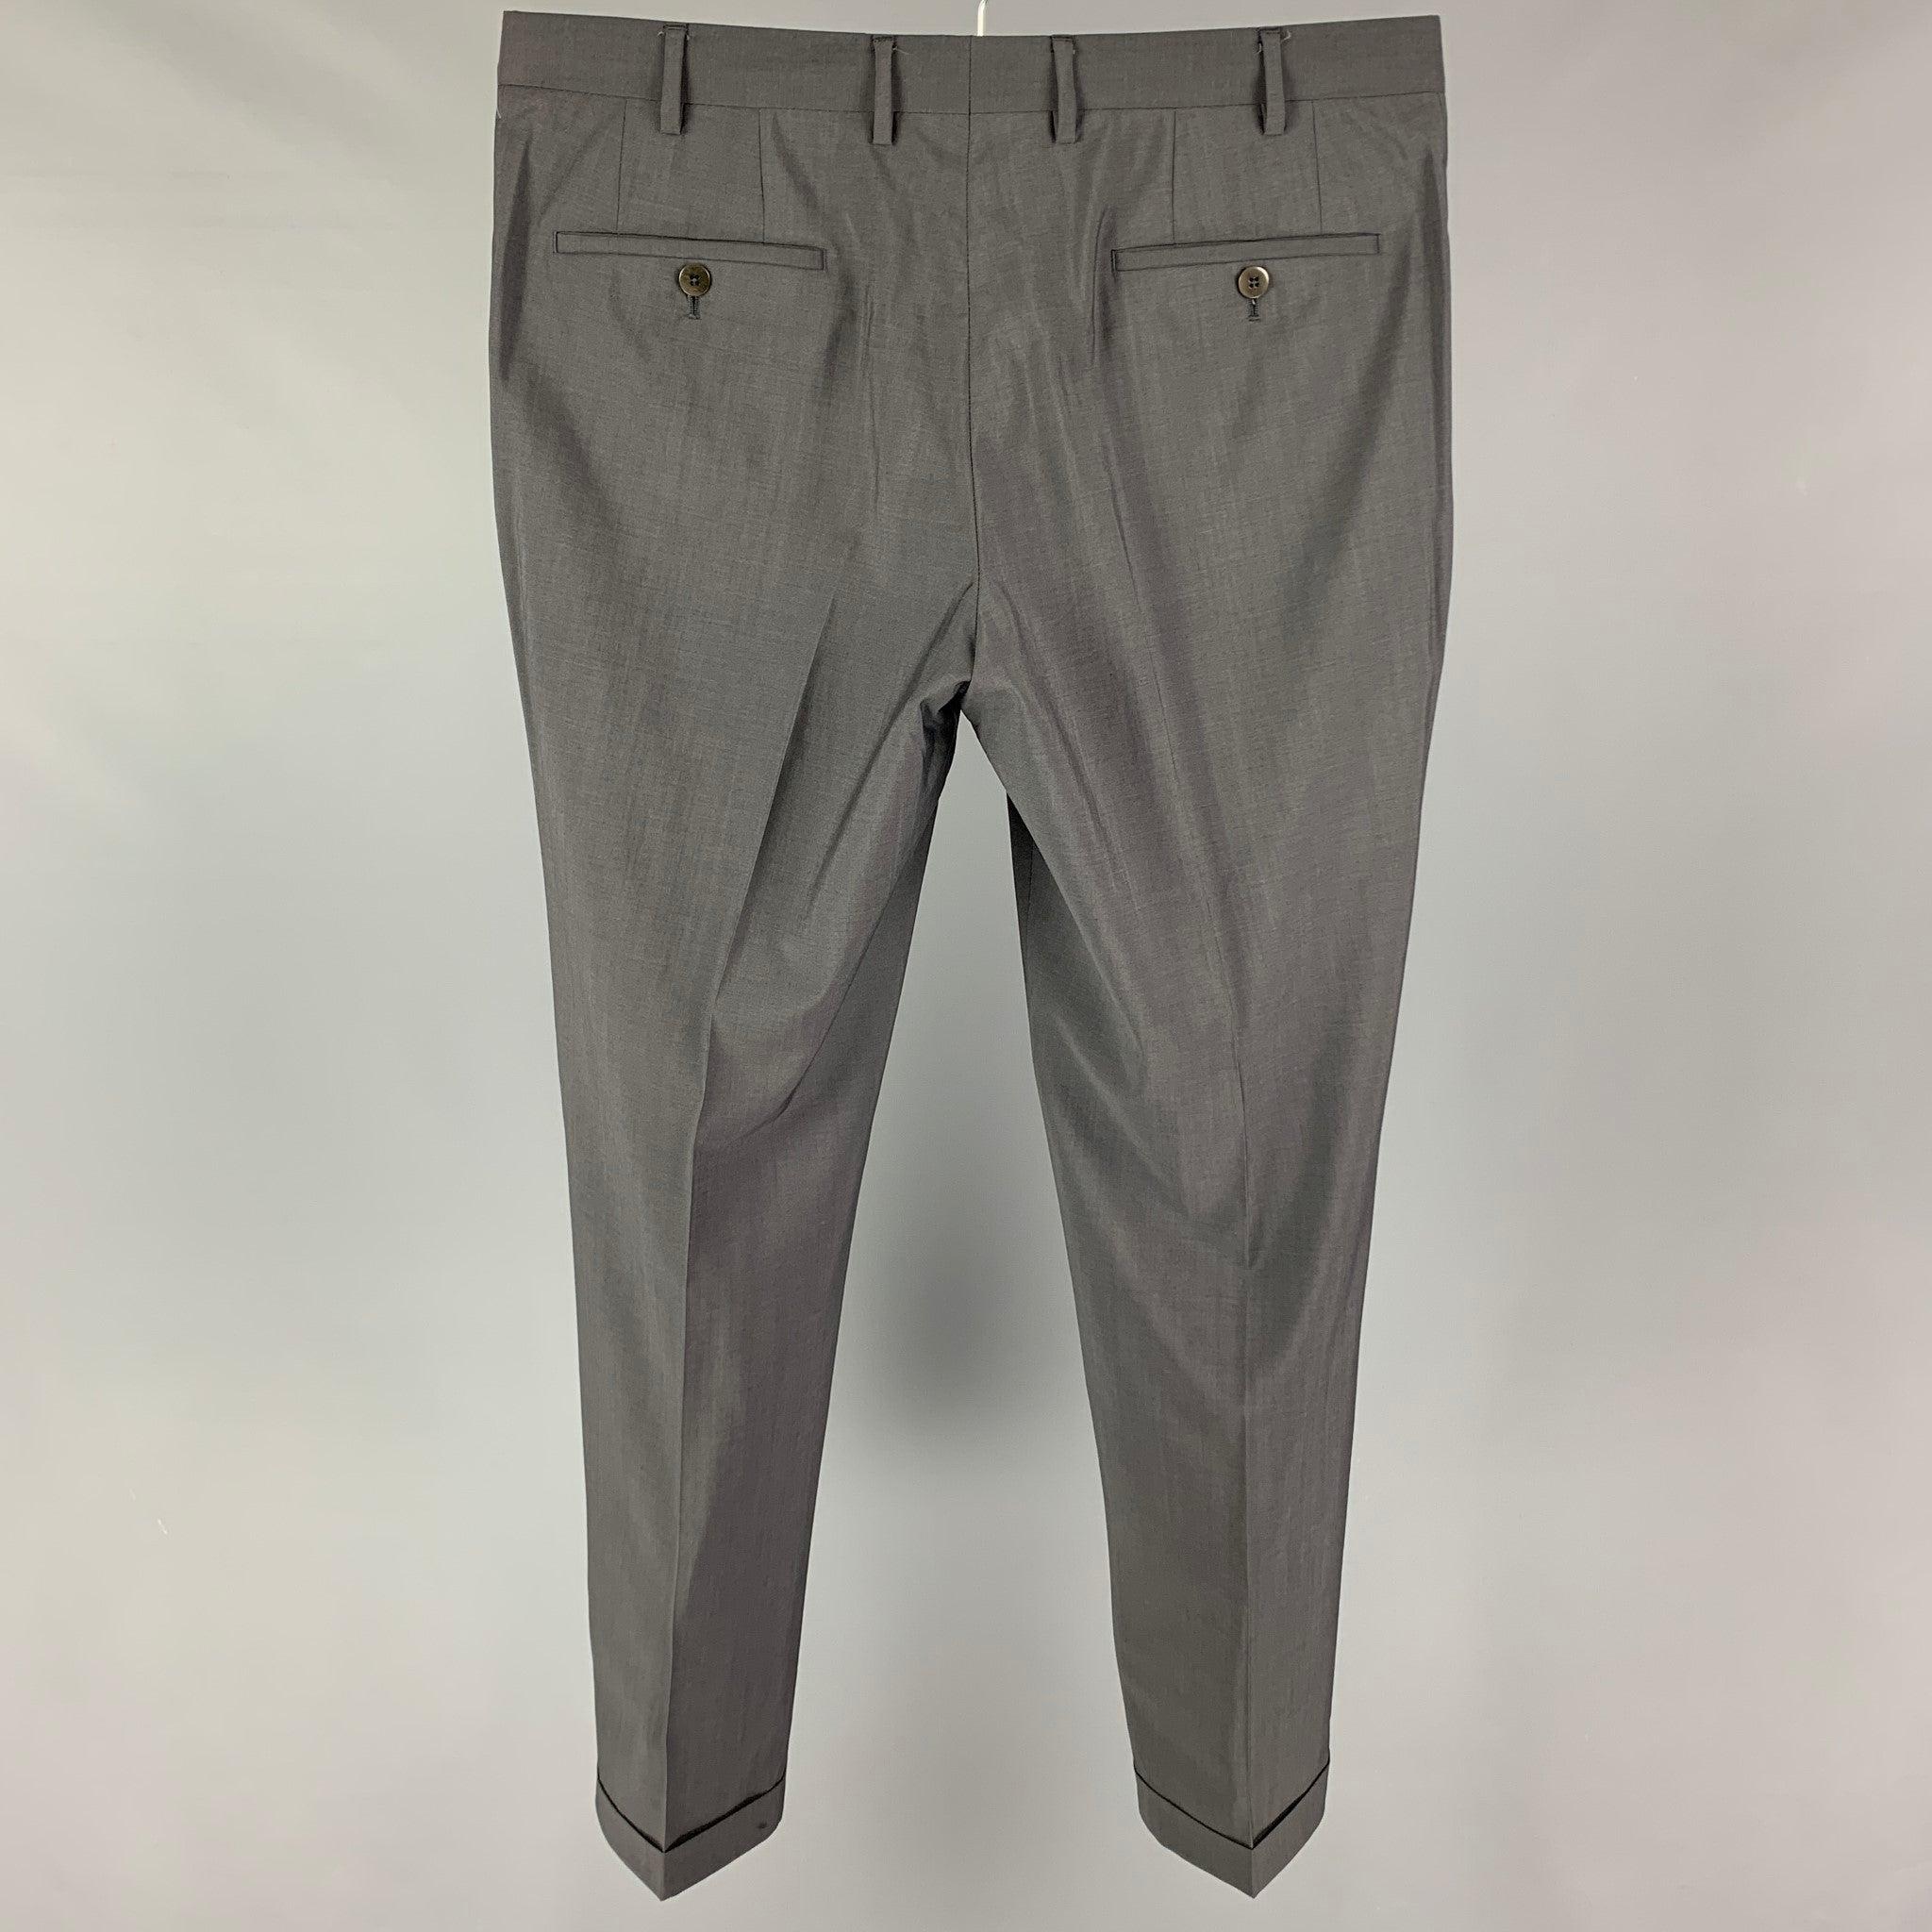 PAL ZILERI dress pants comes in a grey wool blend featuring a flat front, cuffed leg, and a zip fly closure.Very Good
Pre-Owned Condition. 

Marked:   52  

Measurements: 
  Waist: 36 inches  Rise: 10 inches  Inseam: 32 inches 

  
  
 
Reference: